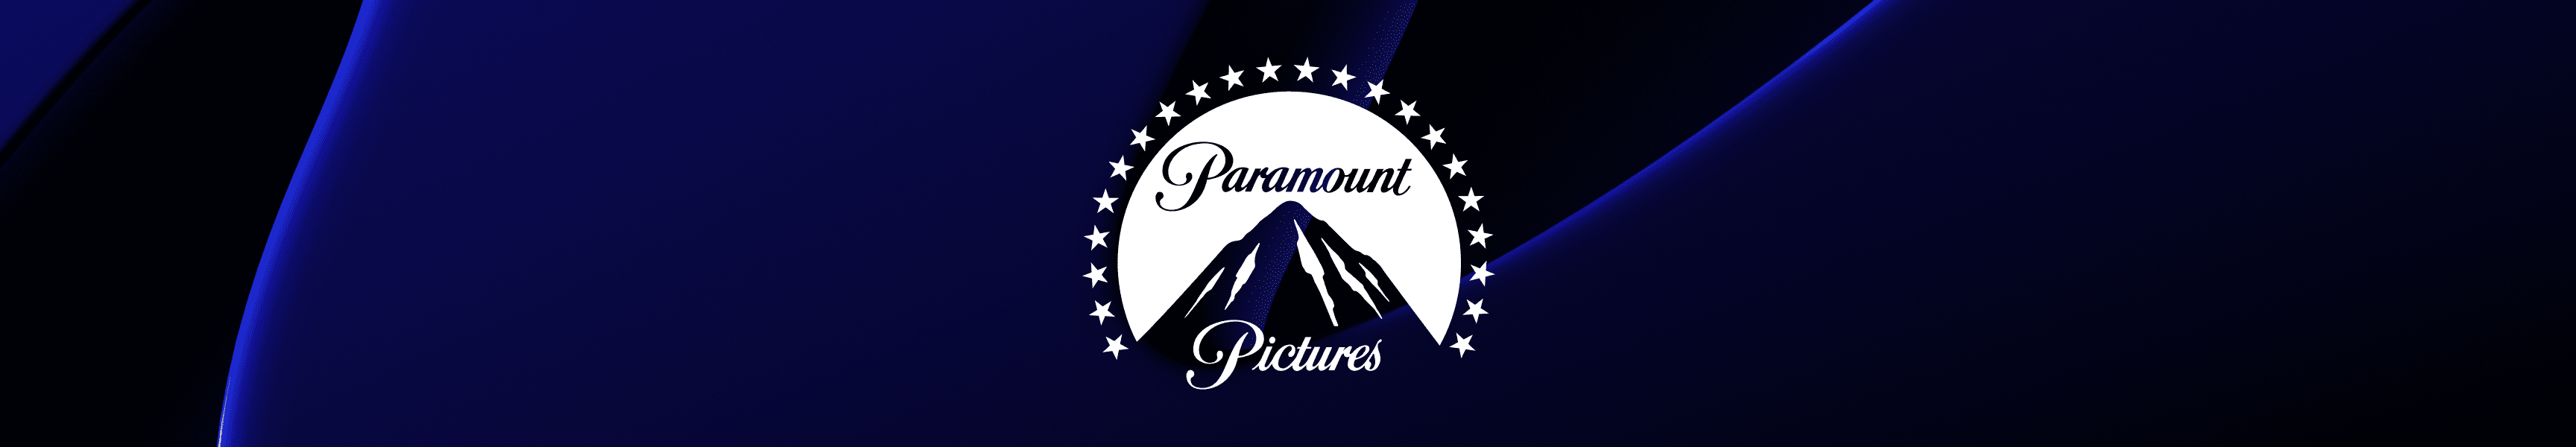 Paramount Pictures DVDs